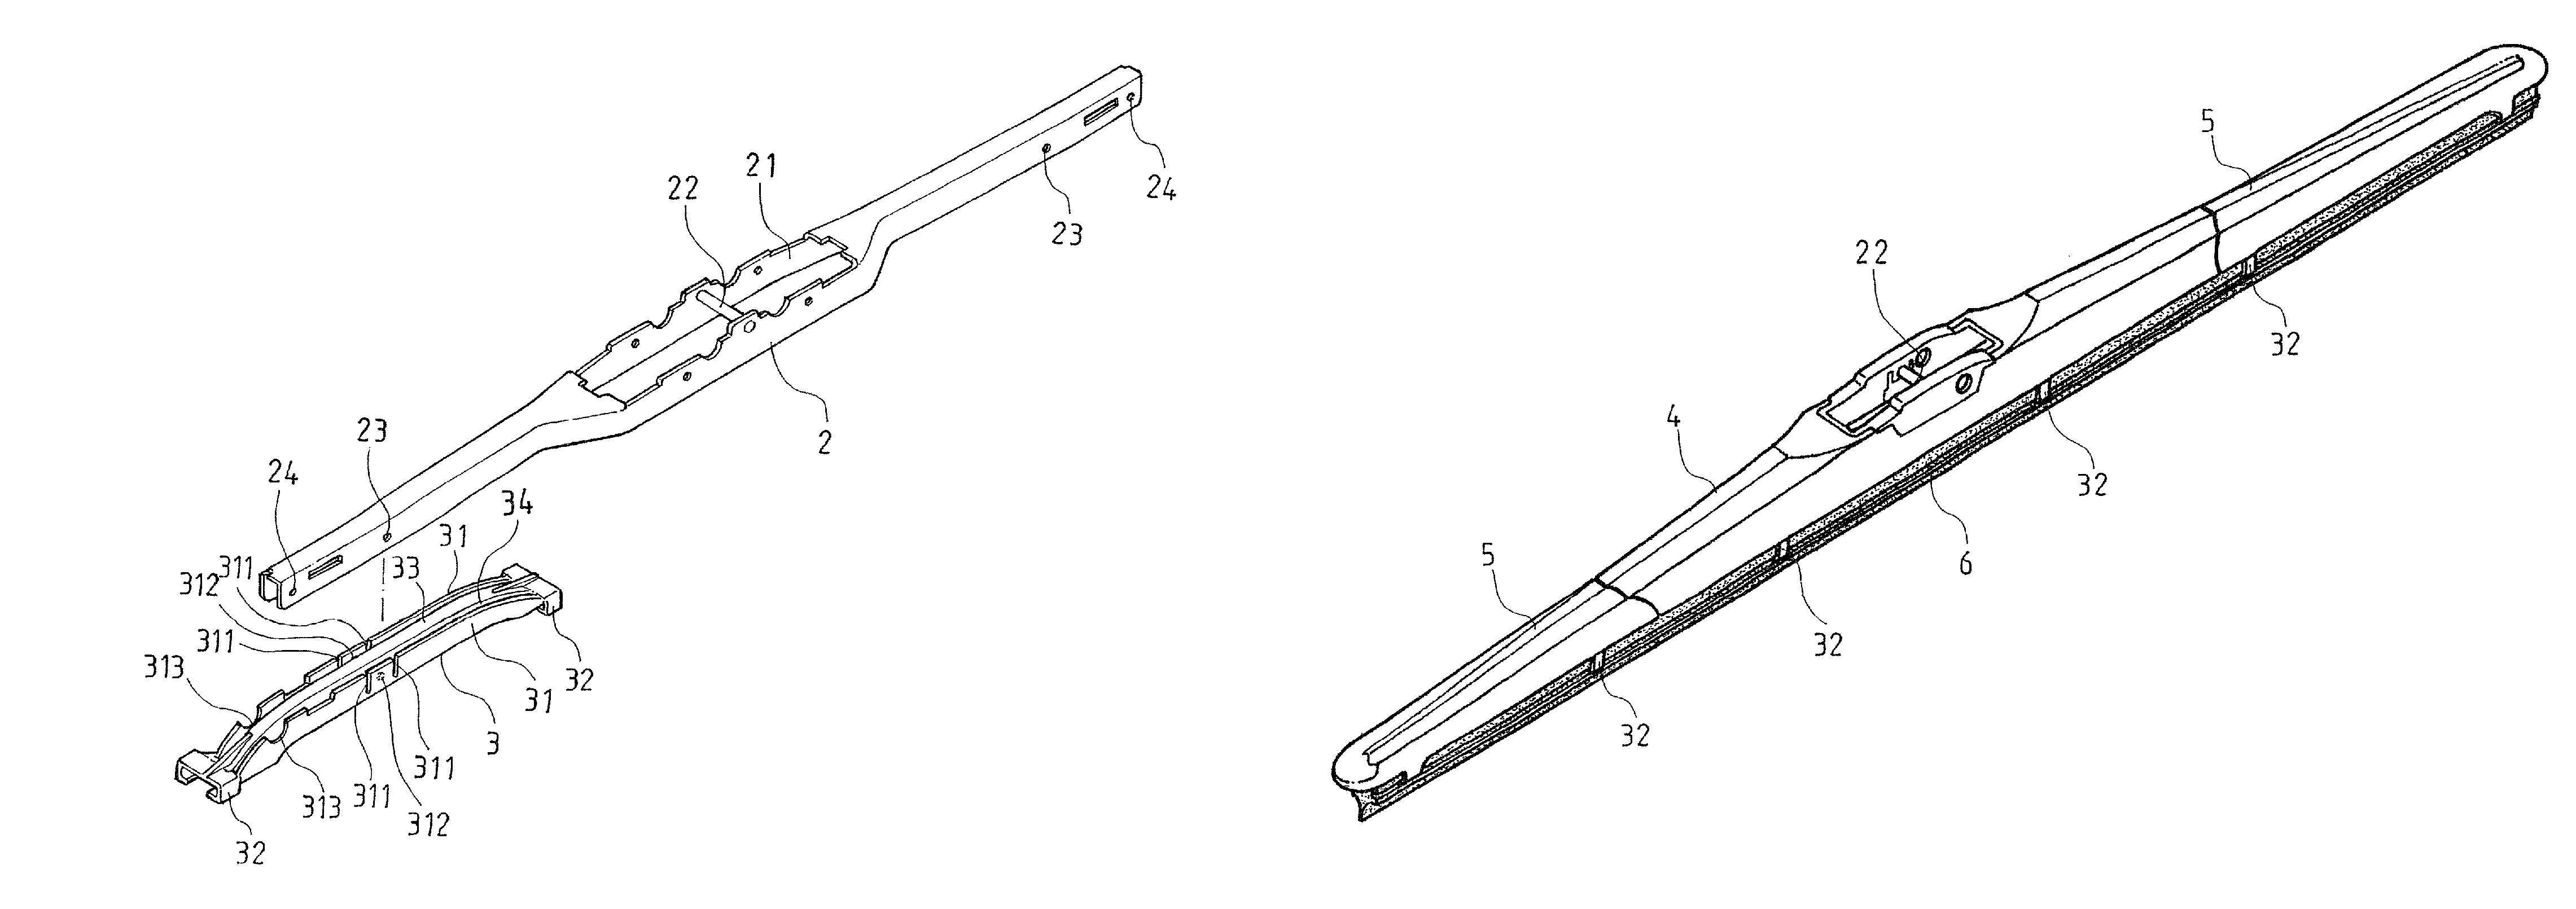 Frame coupling structure of windshield wiper